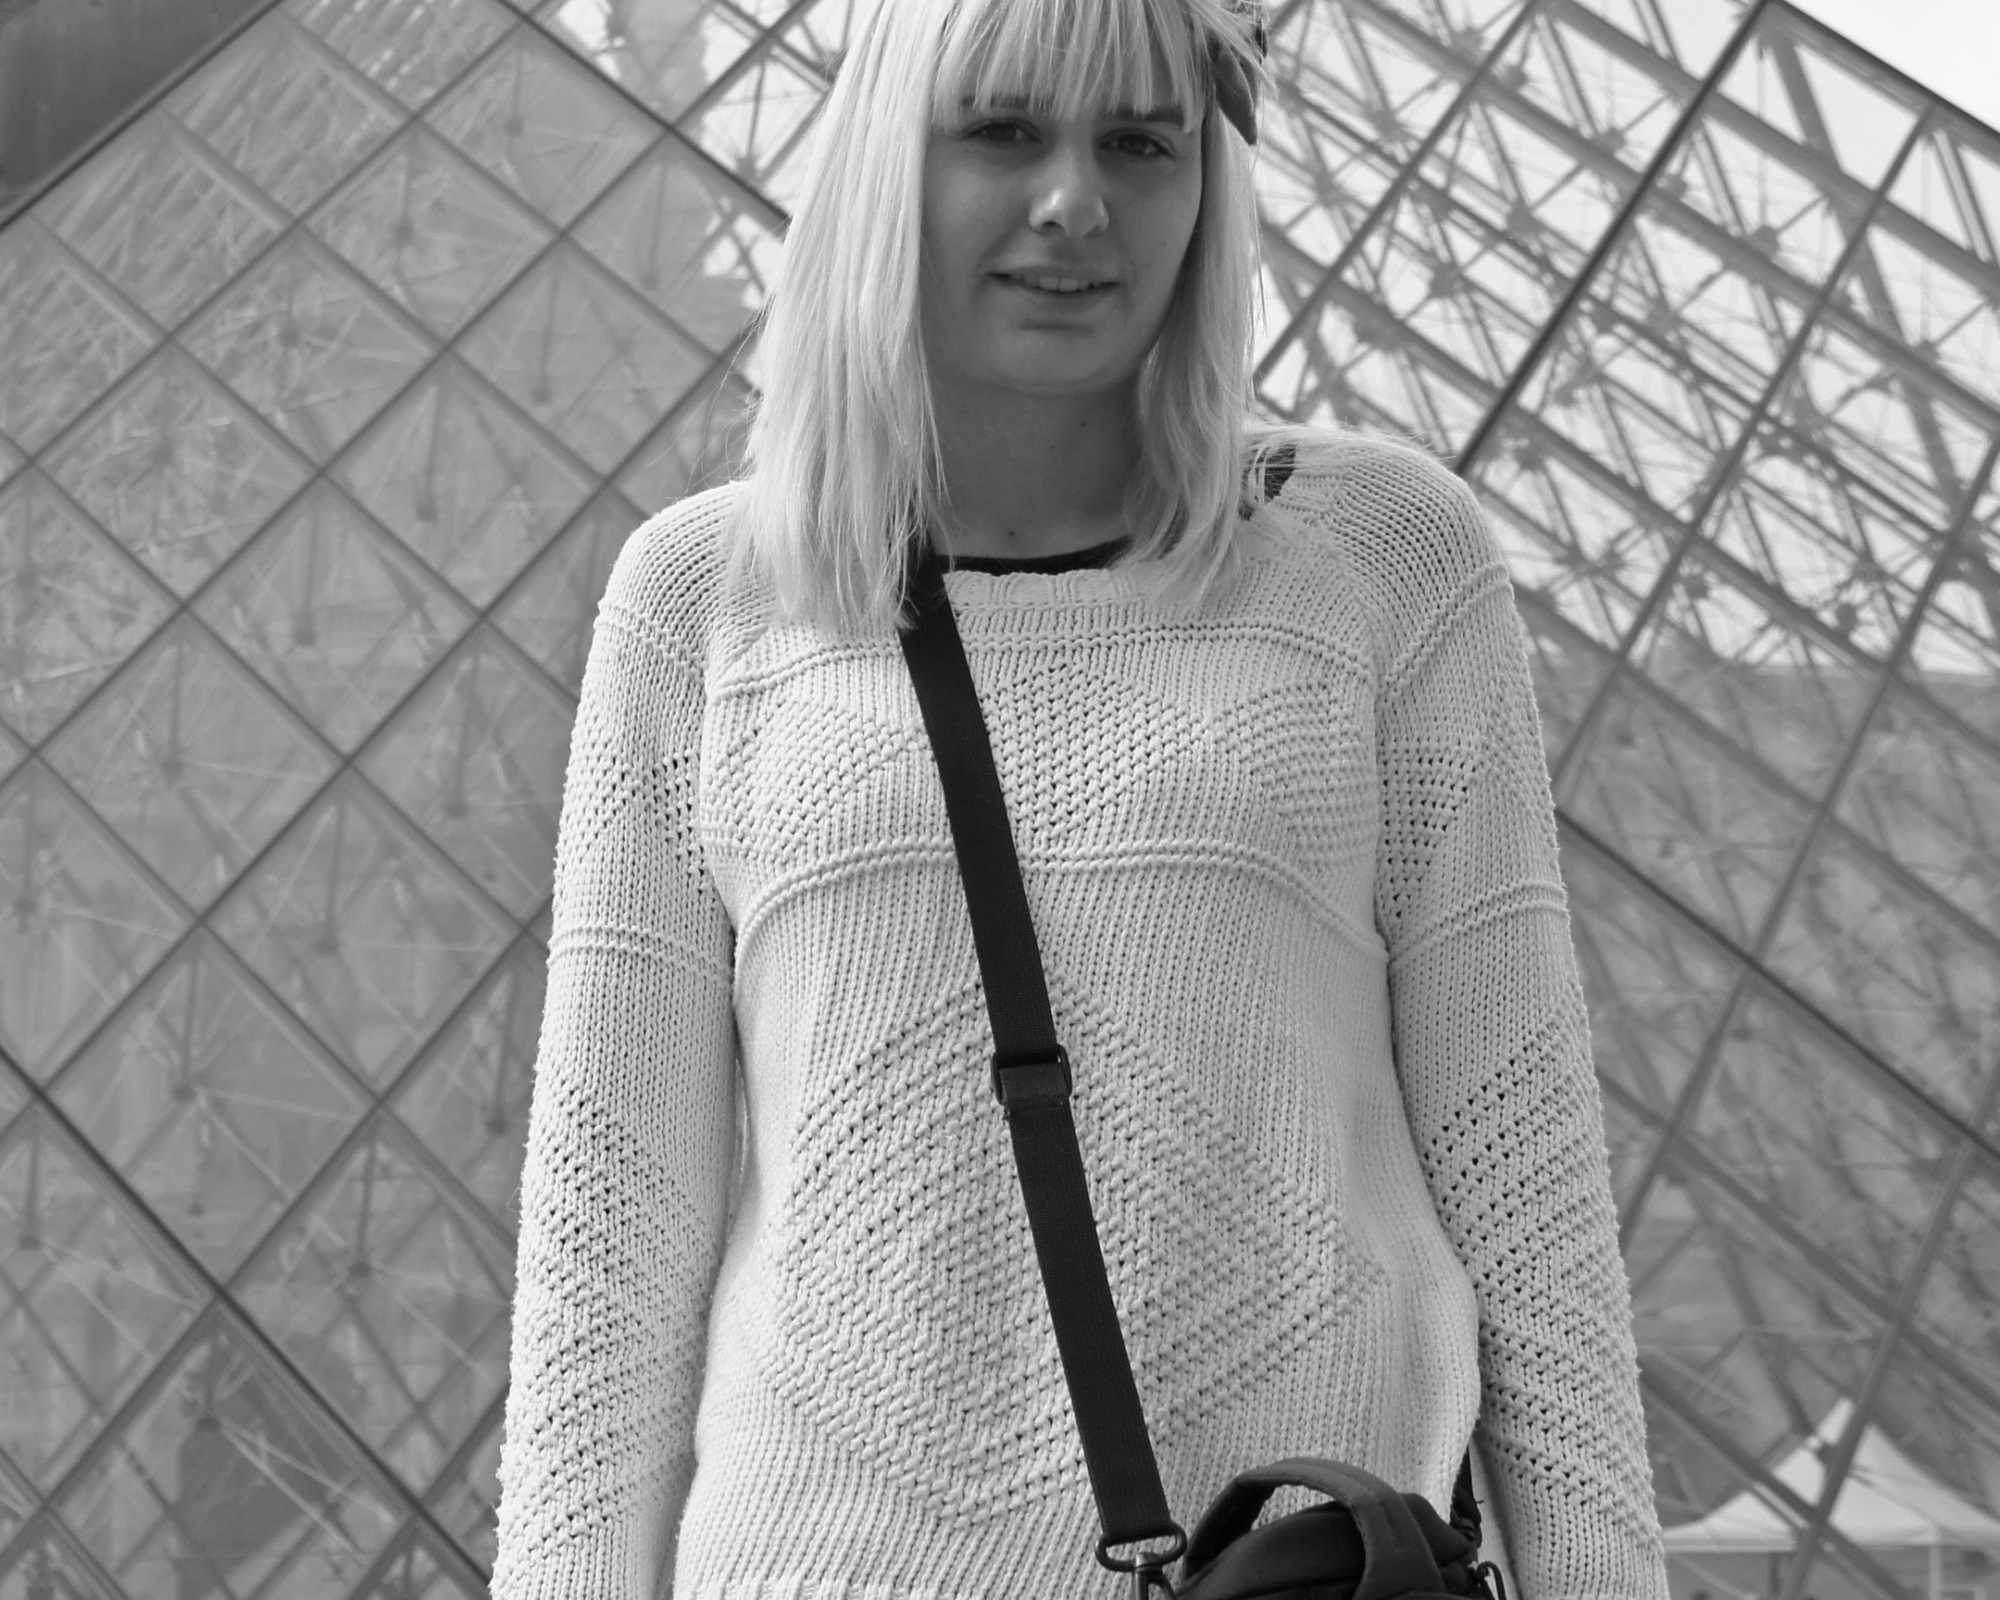 Lisa and the Glass Pyramids at The Louvre